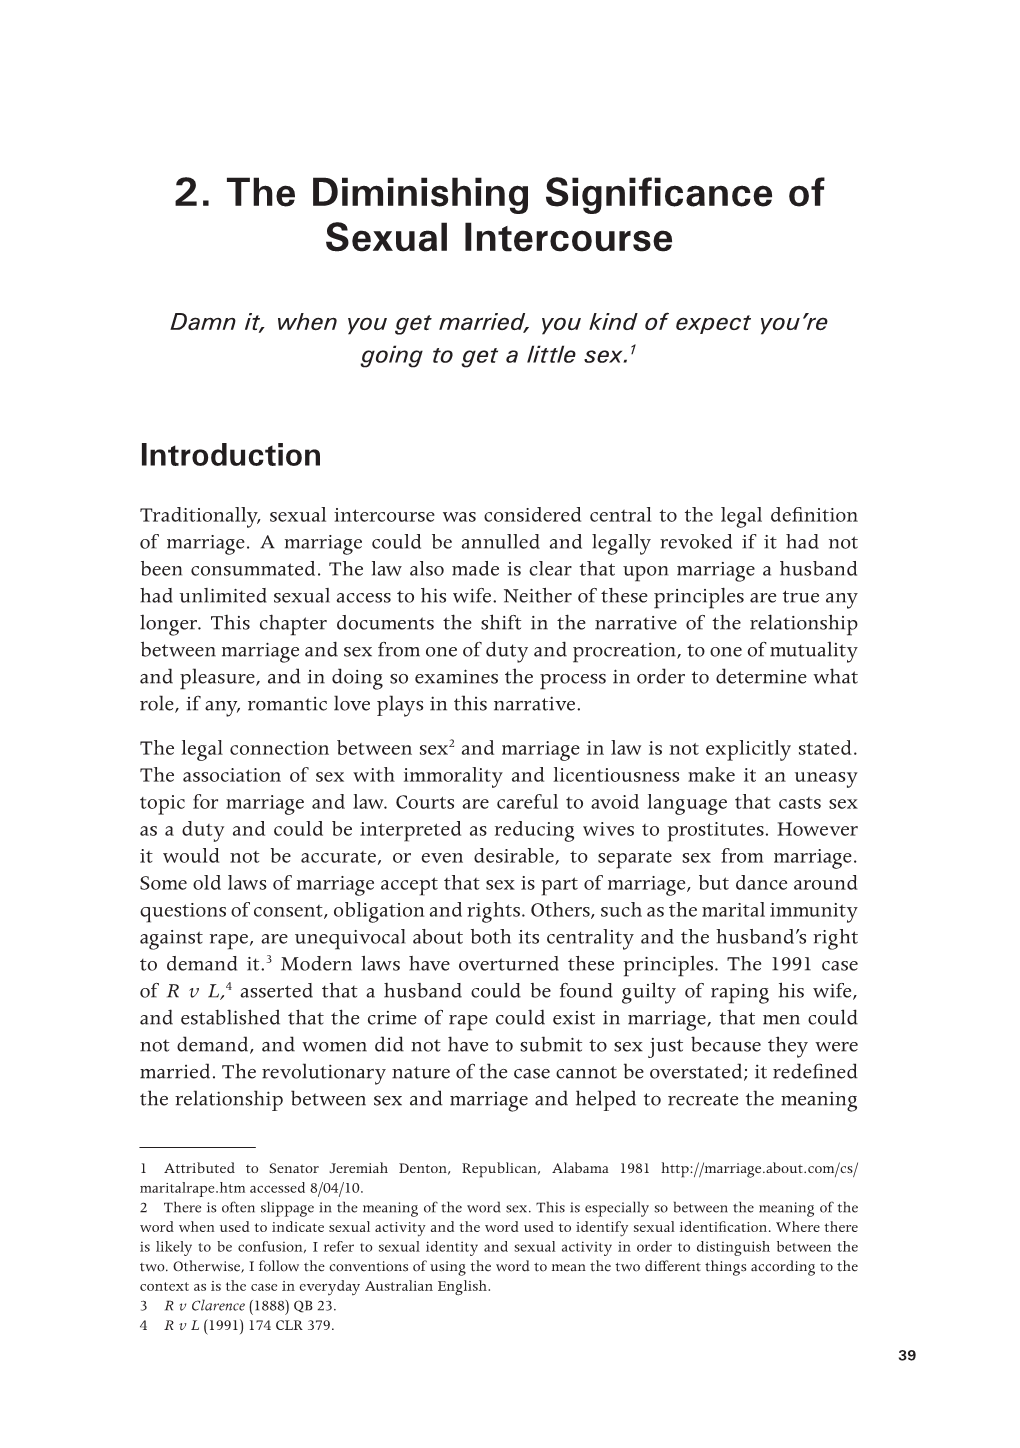 2. the Diminishing Significance of Sexual Intercourse